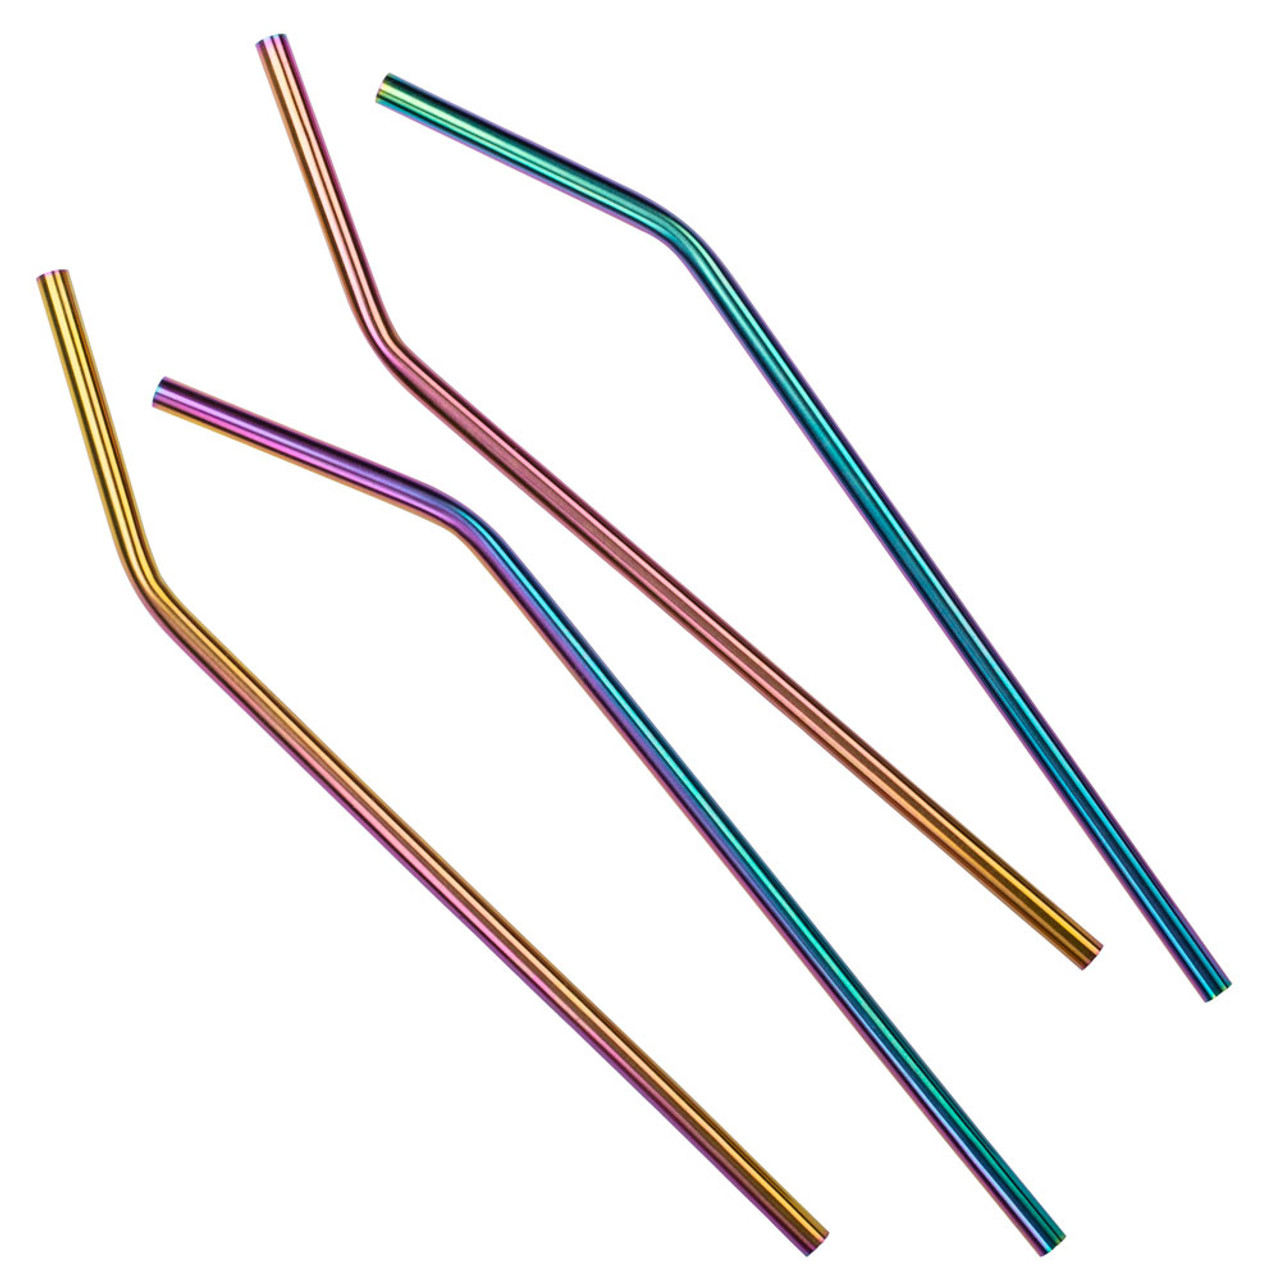 https://cdn11.bigcommerce.com/s-cznxq08r7/images/stencil/1280x1280/products/519/8395/rainbow-straw-set-4_845033088713_behind_the_bar_stainless_steel_drinking_straw_4_rainbow_01__51917.1590771945.jpg?c=1